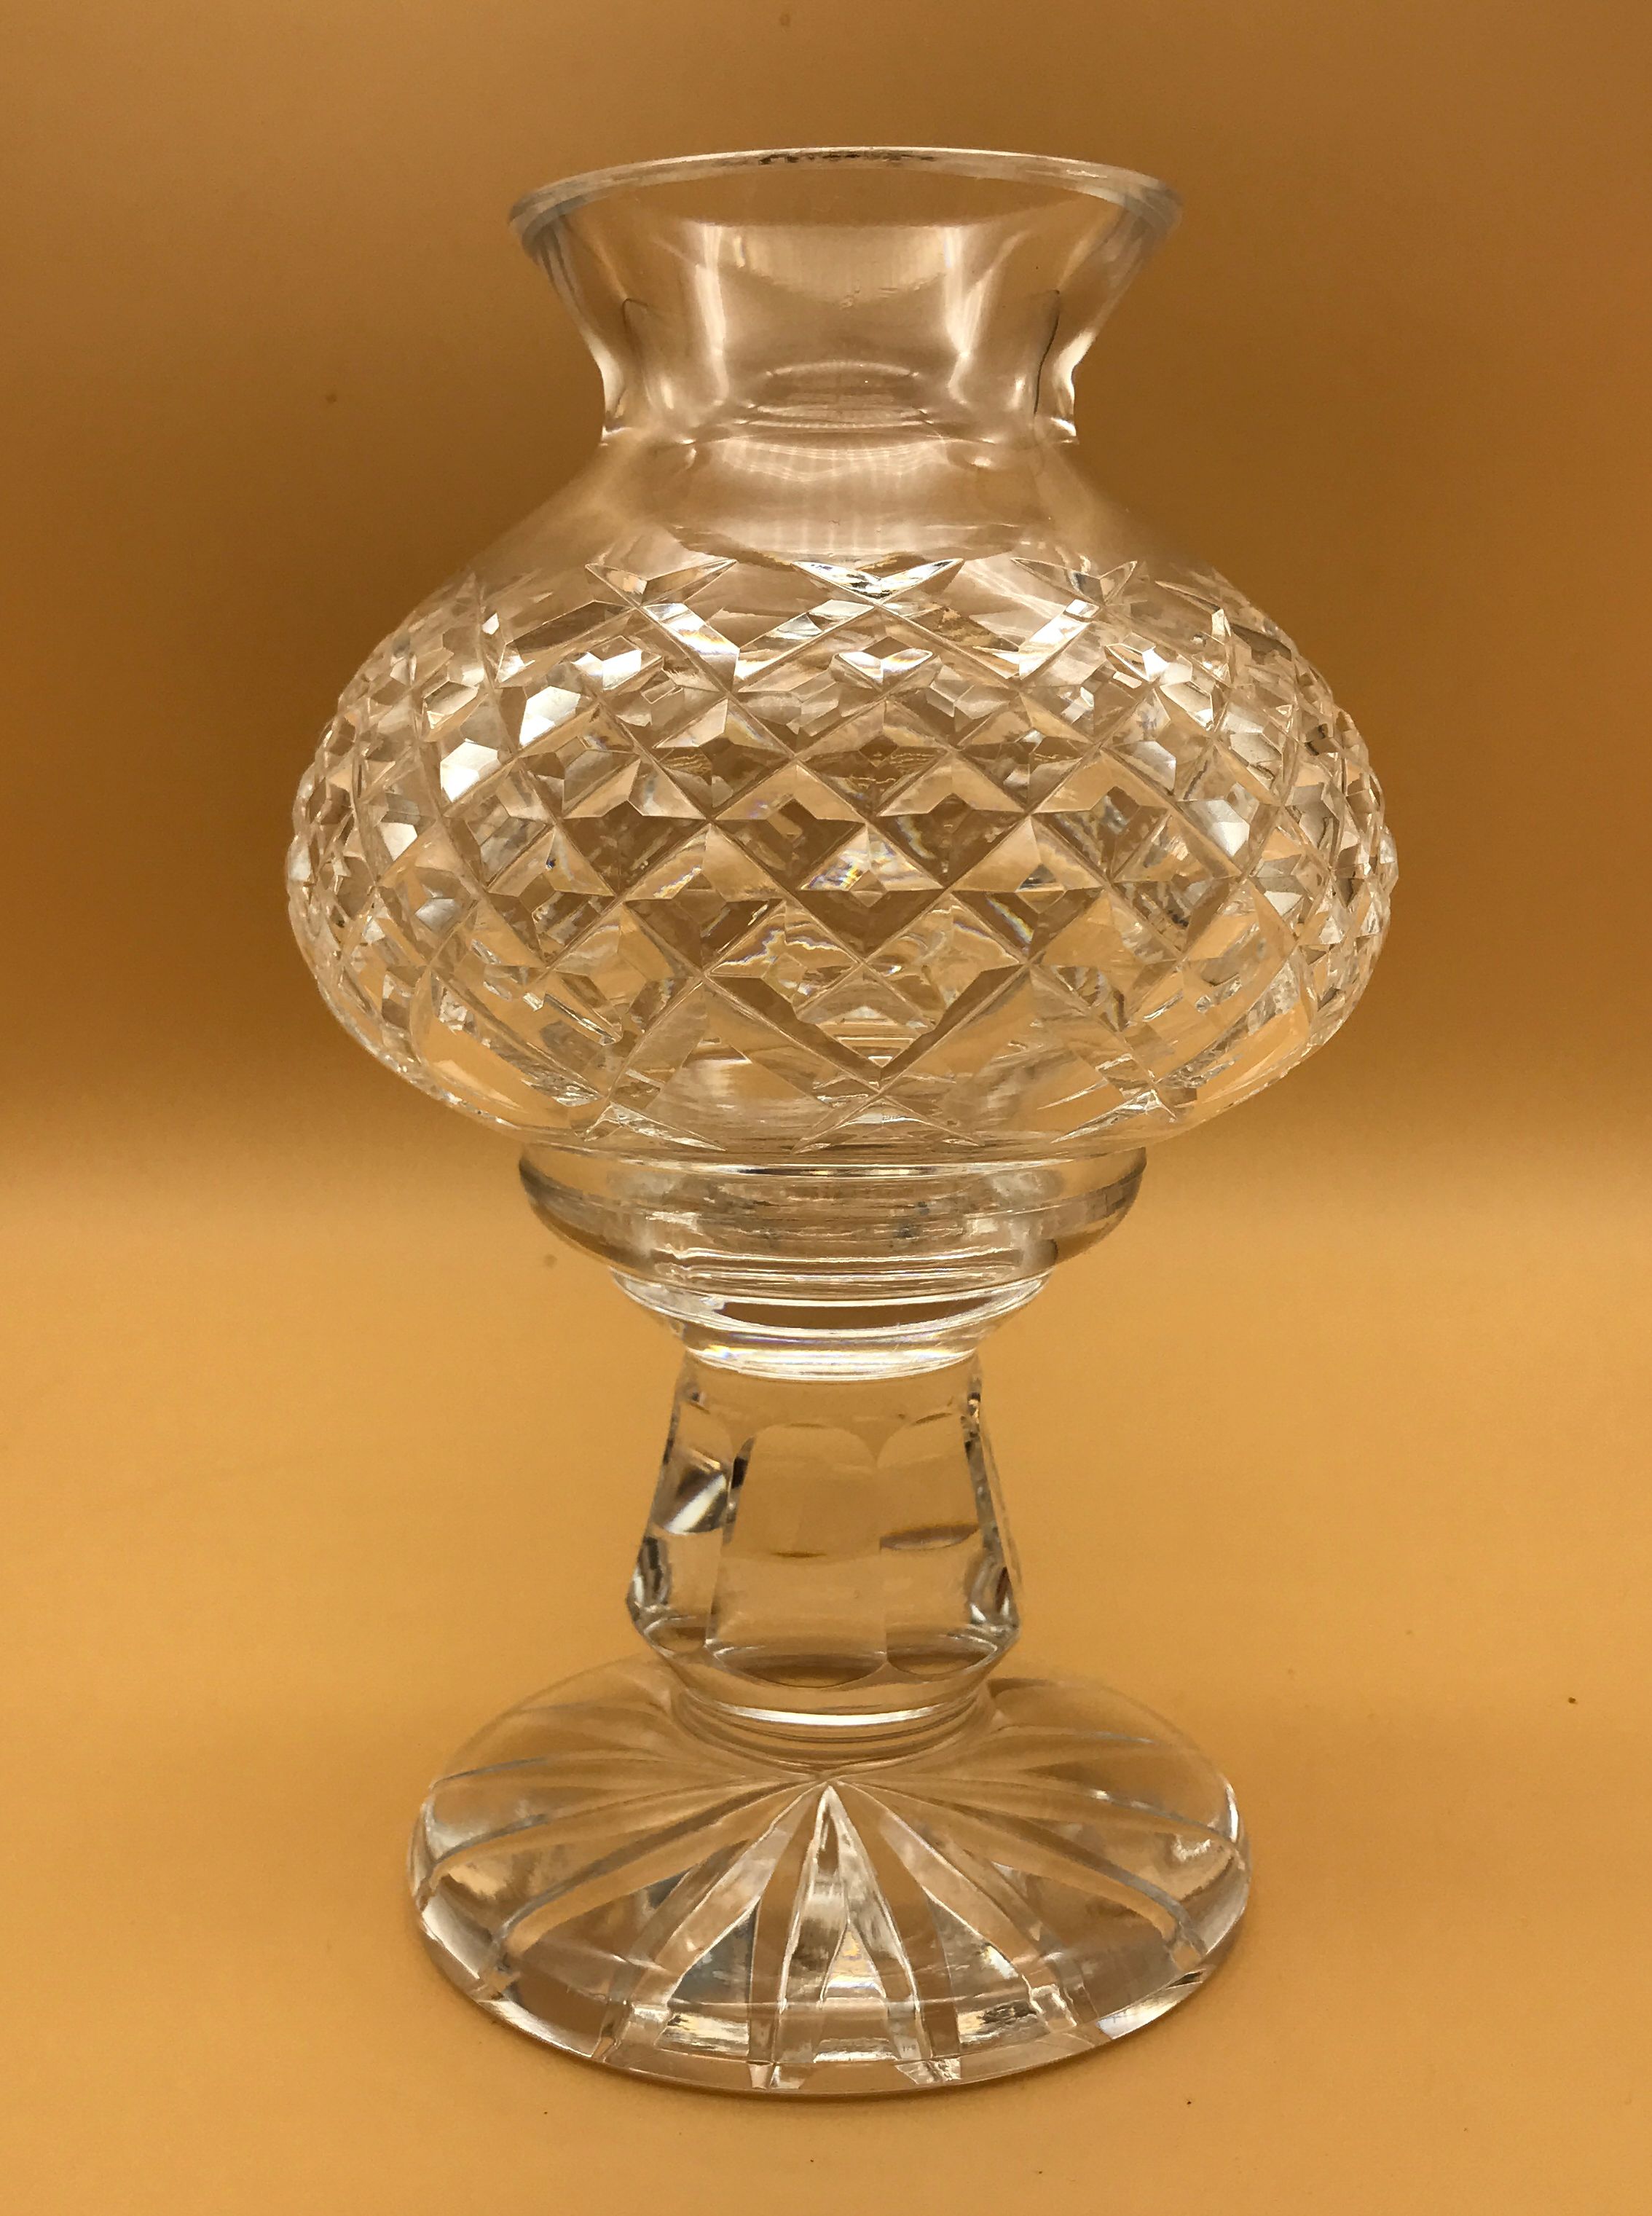 Waterford Crystal Hurricane Votive Candle Lamp 2 Piece - Decorative Glass